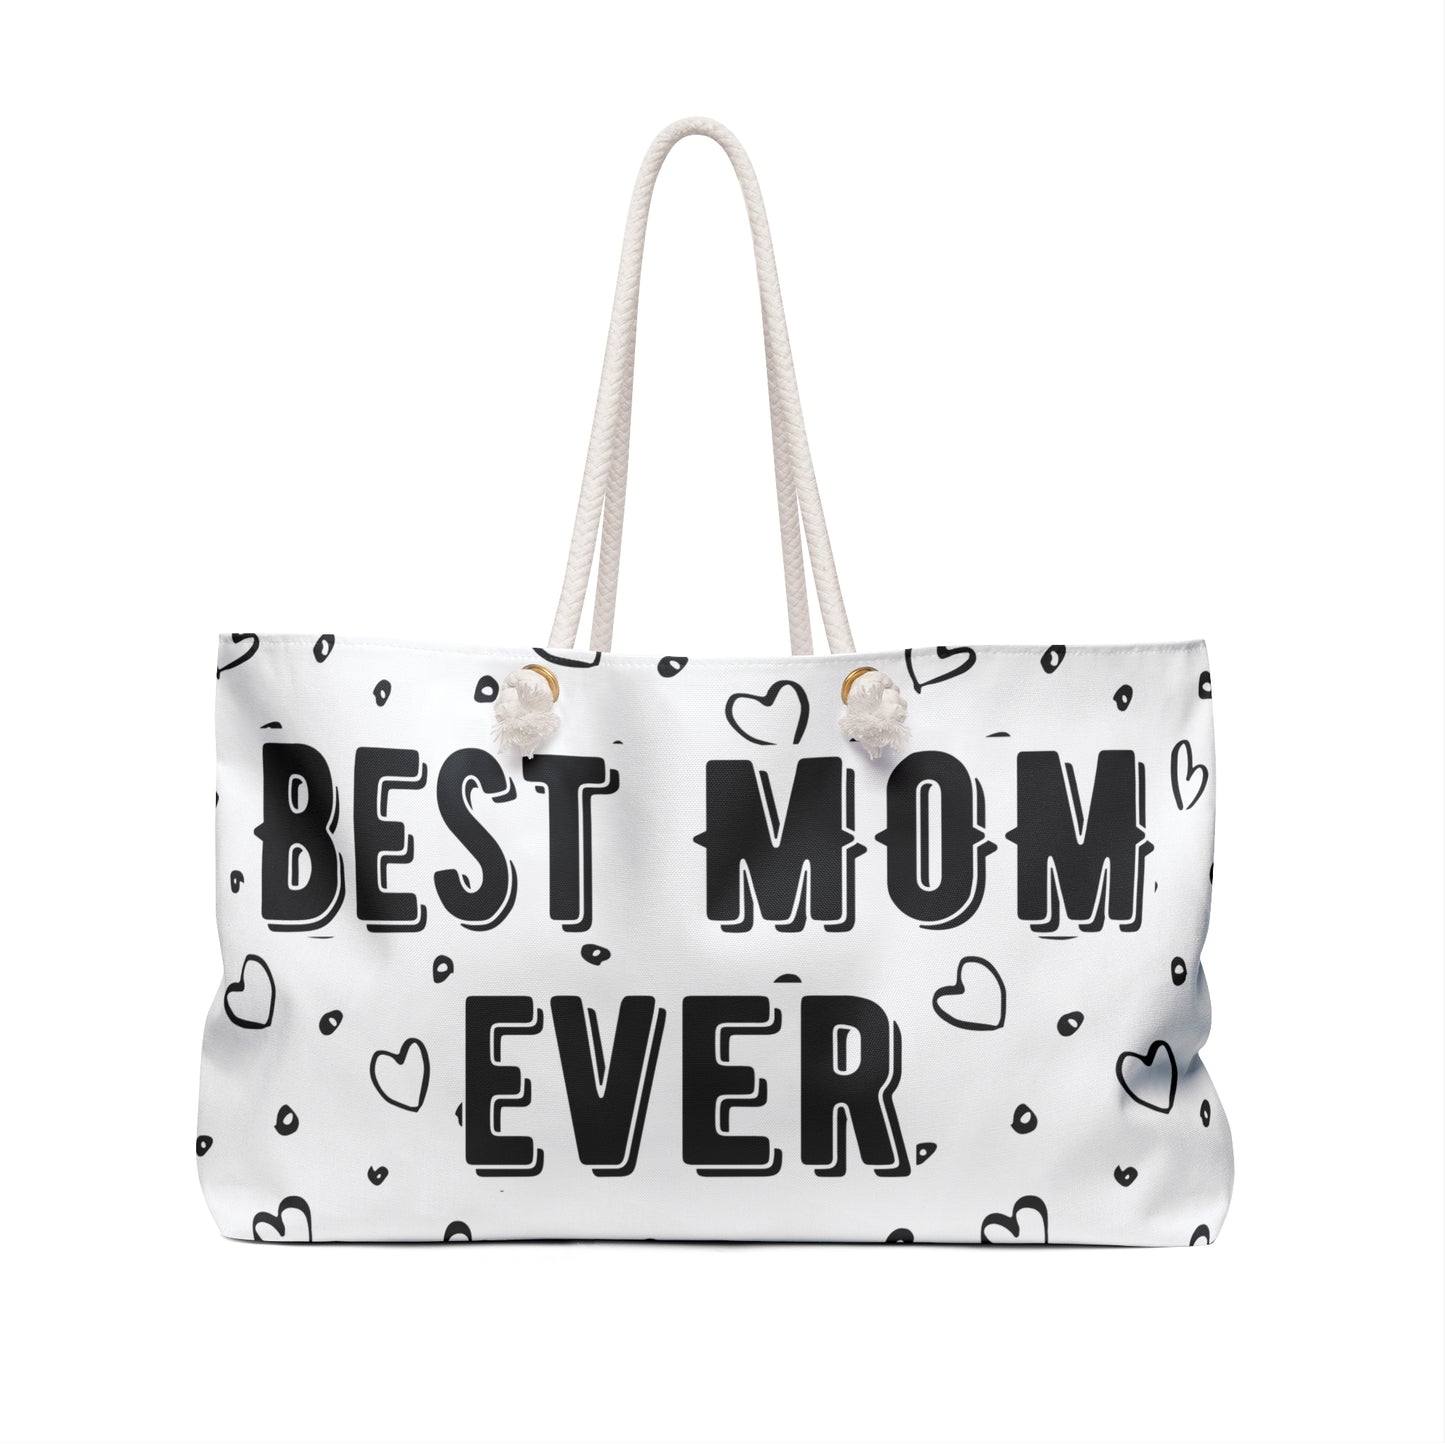 Personalized spacious Weekender Bag, Mother's Day, flower designs, Gifts for mom's day, custom mama bag (best mom ever)